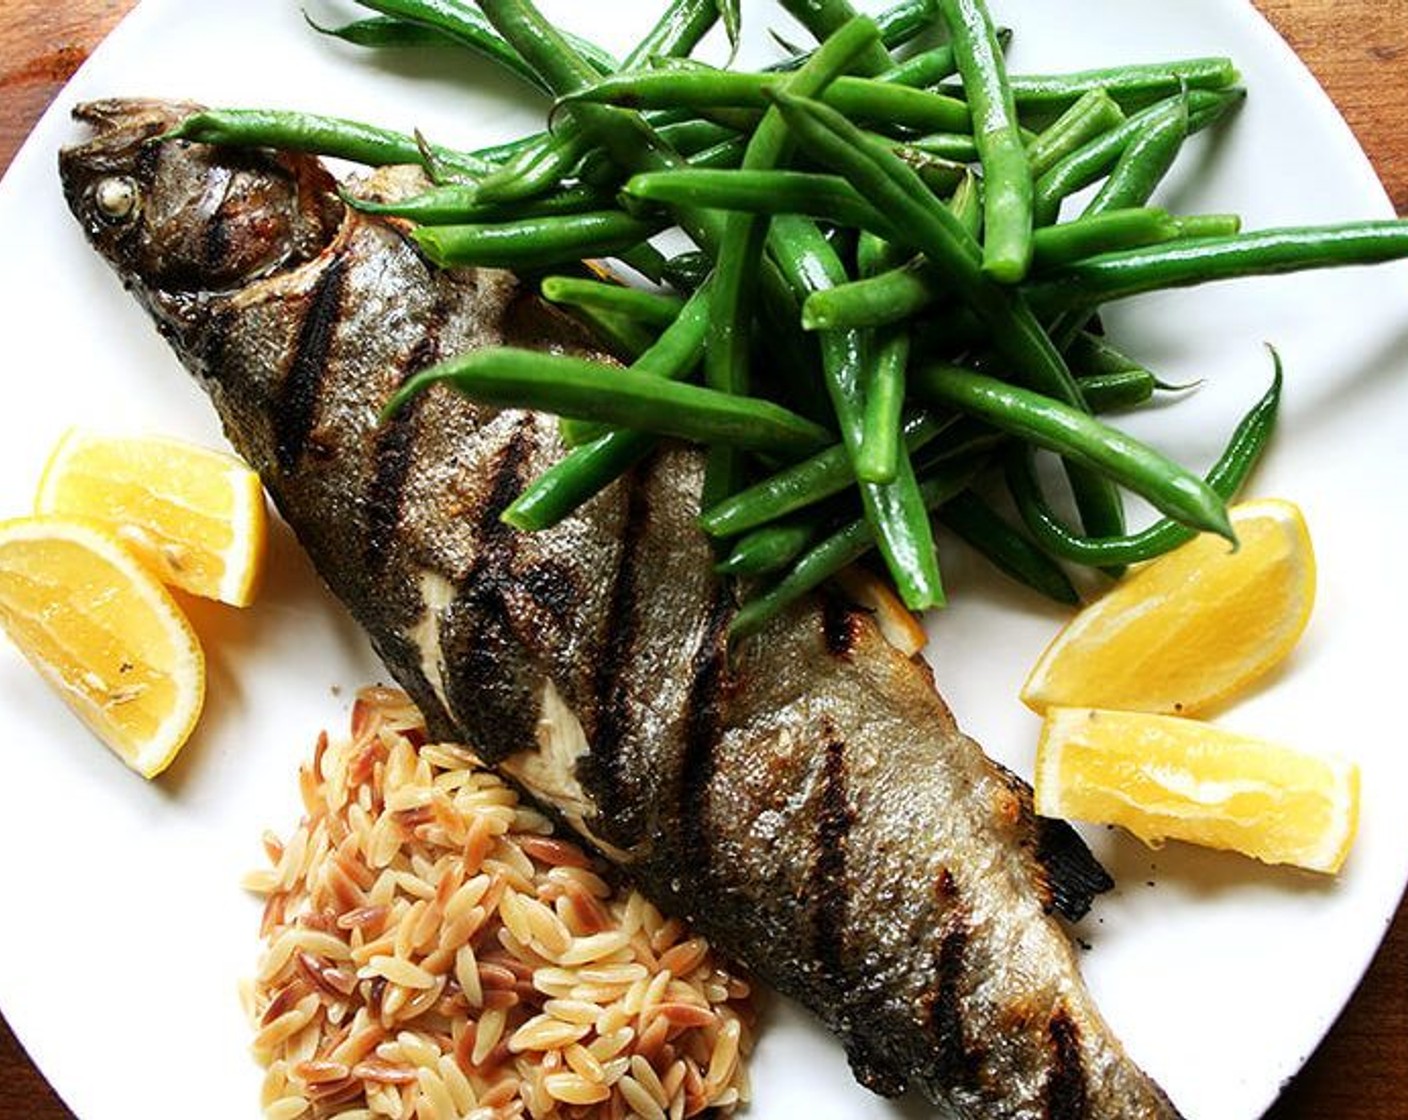 Whole-Grilled Trout with Green Beans and Orzo